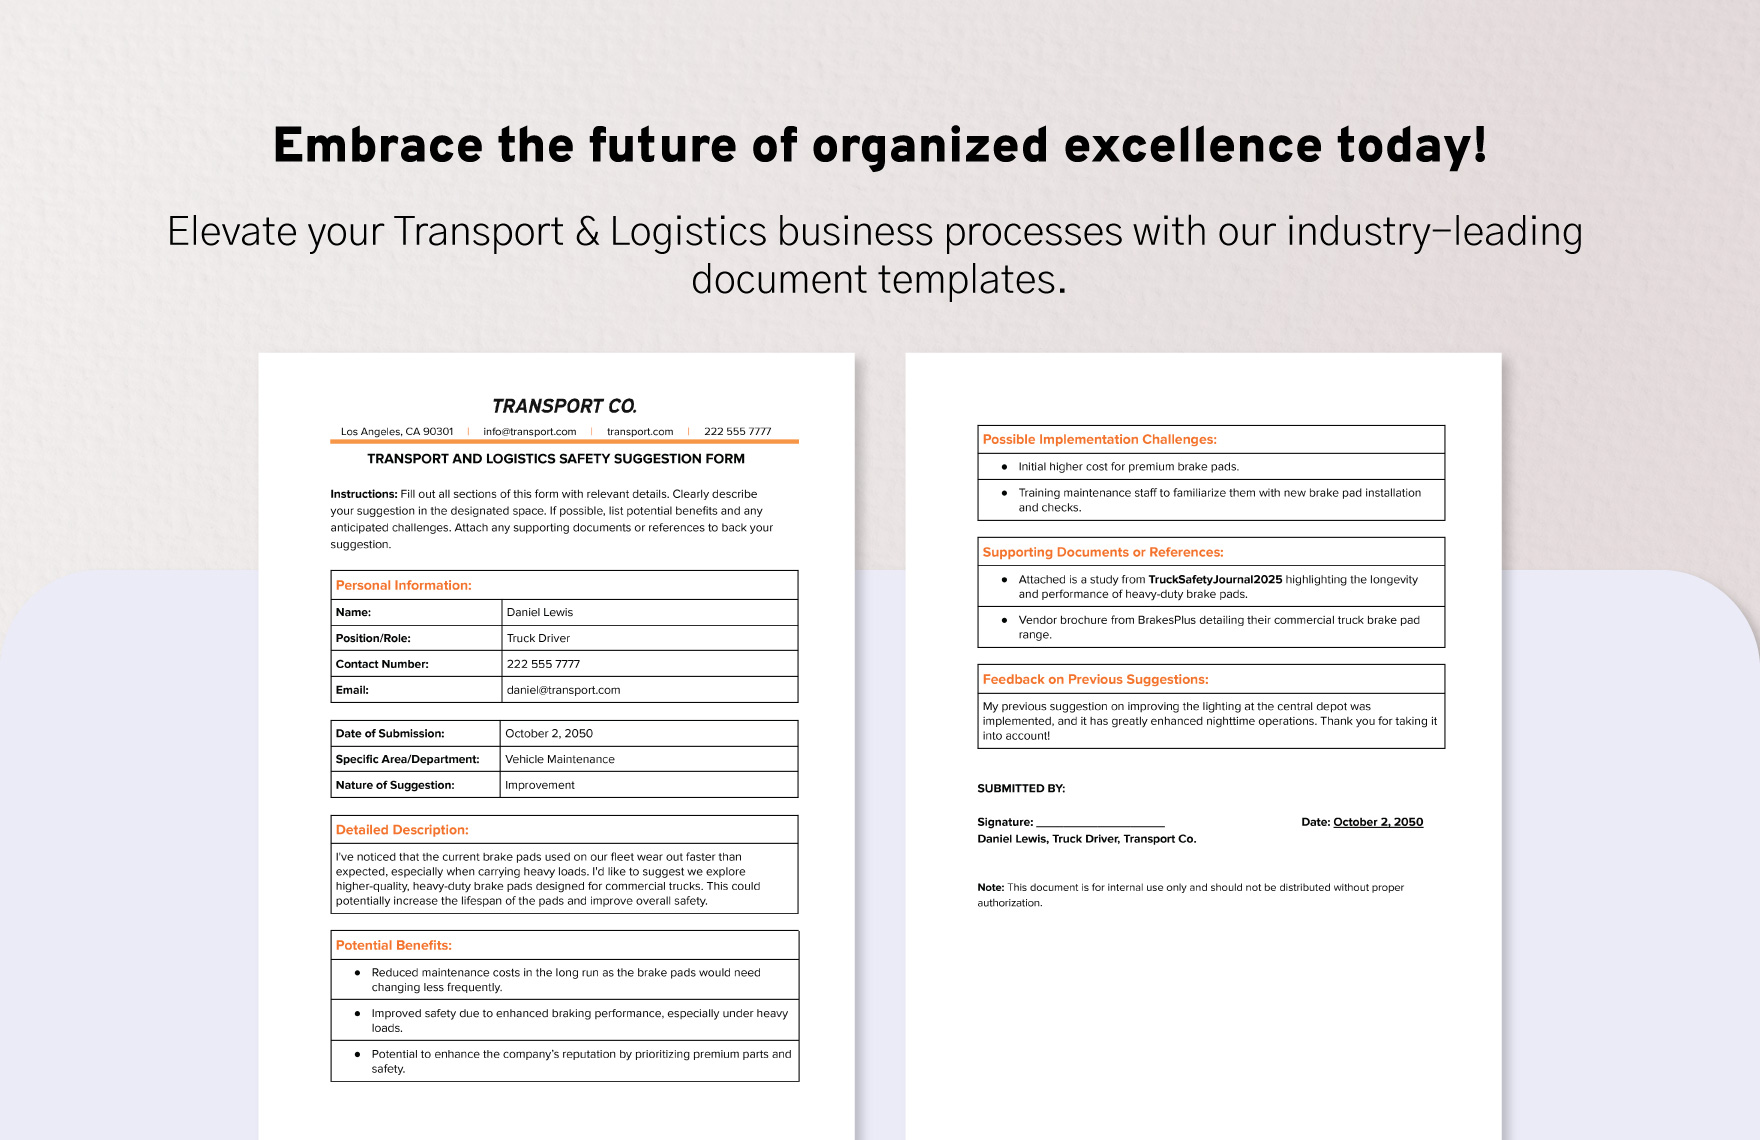 Transport and Logistics Safety Suggestion Form Template